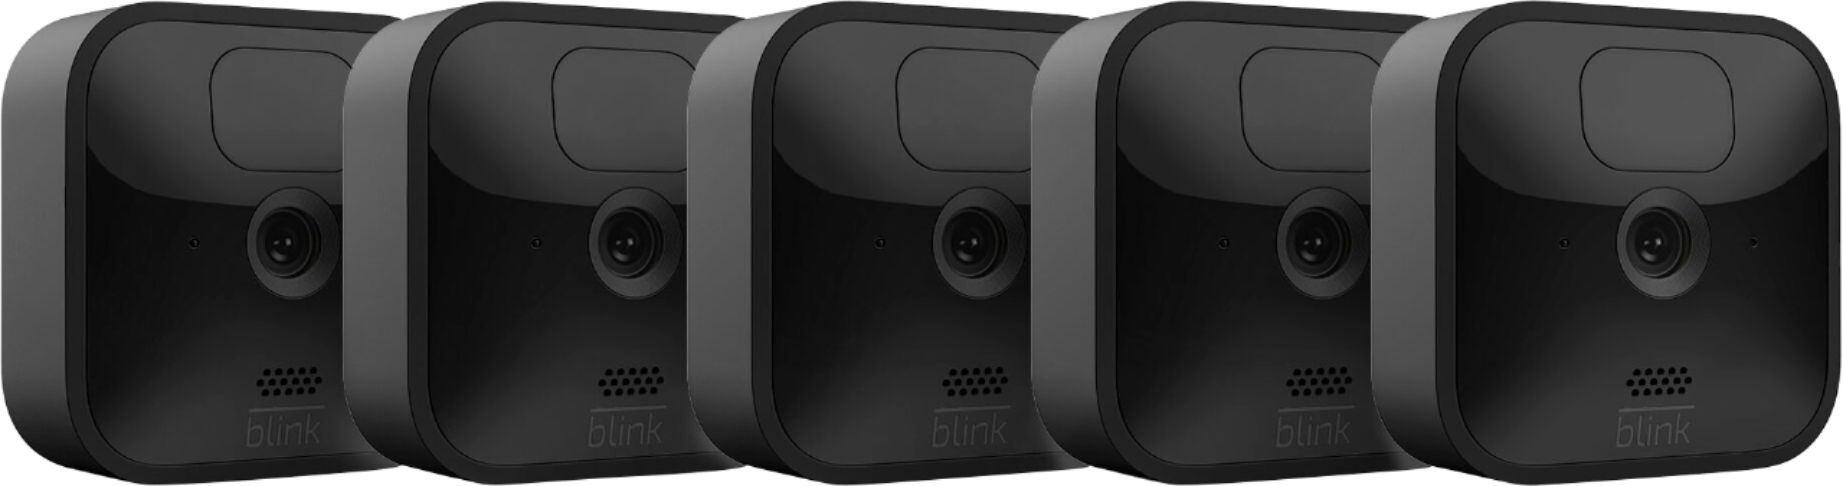 Zoom in on Front Zoom. Blink - 5-cam Outdoor Wireless 1080p Camera Kit.